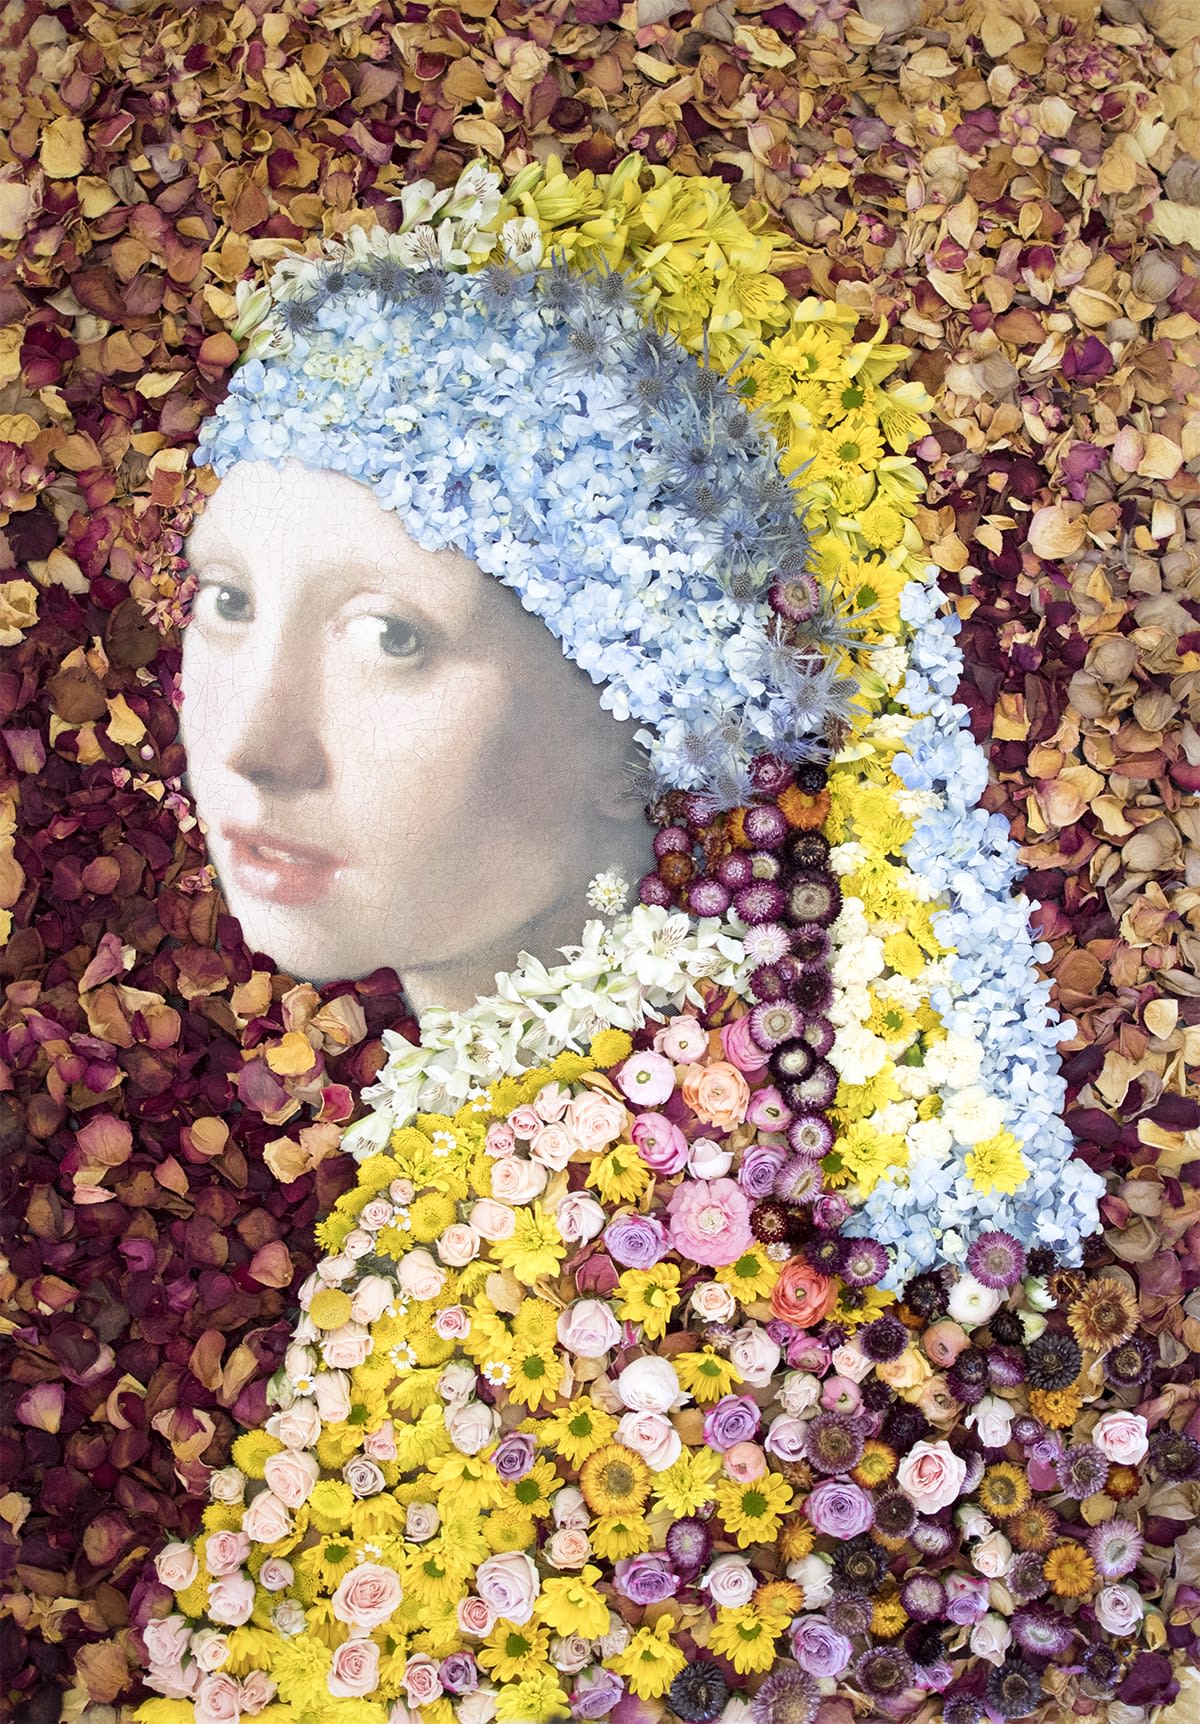 Photo of girl with yellow bandana and pearl earring, surrounded by flowers